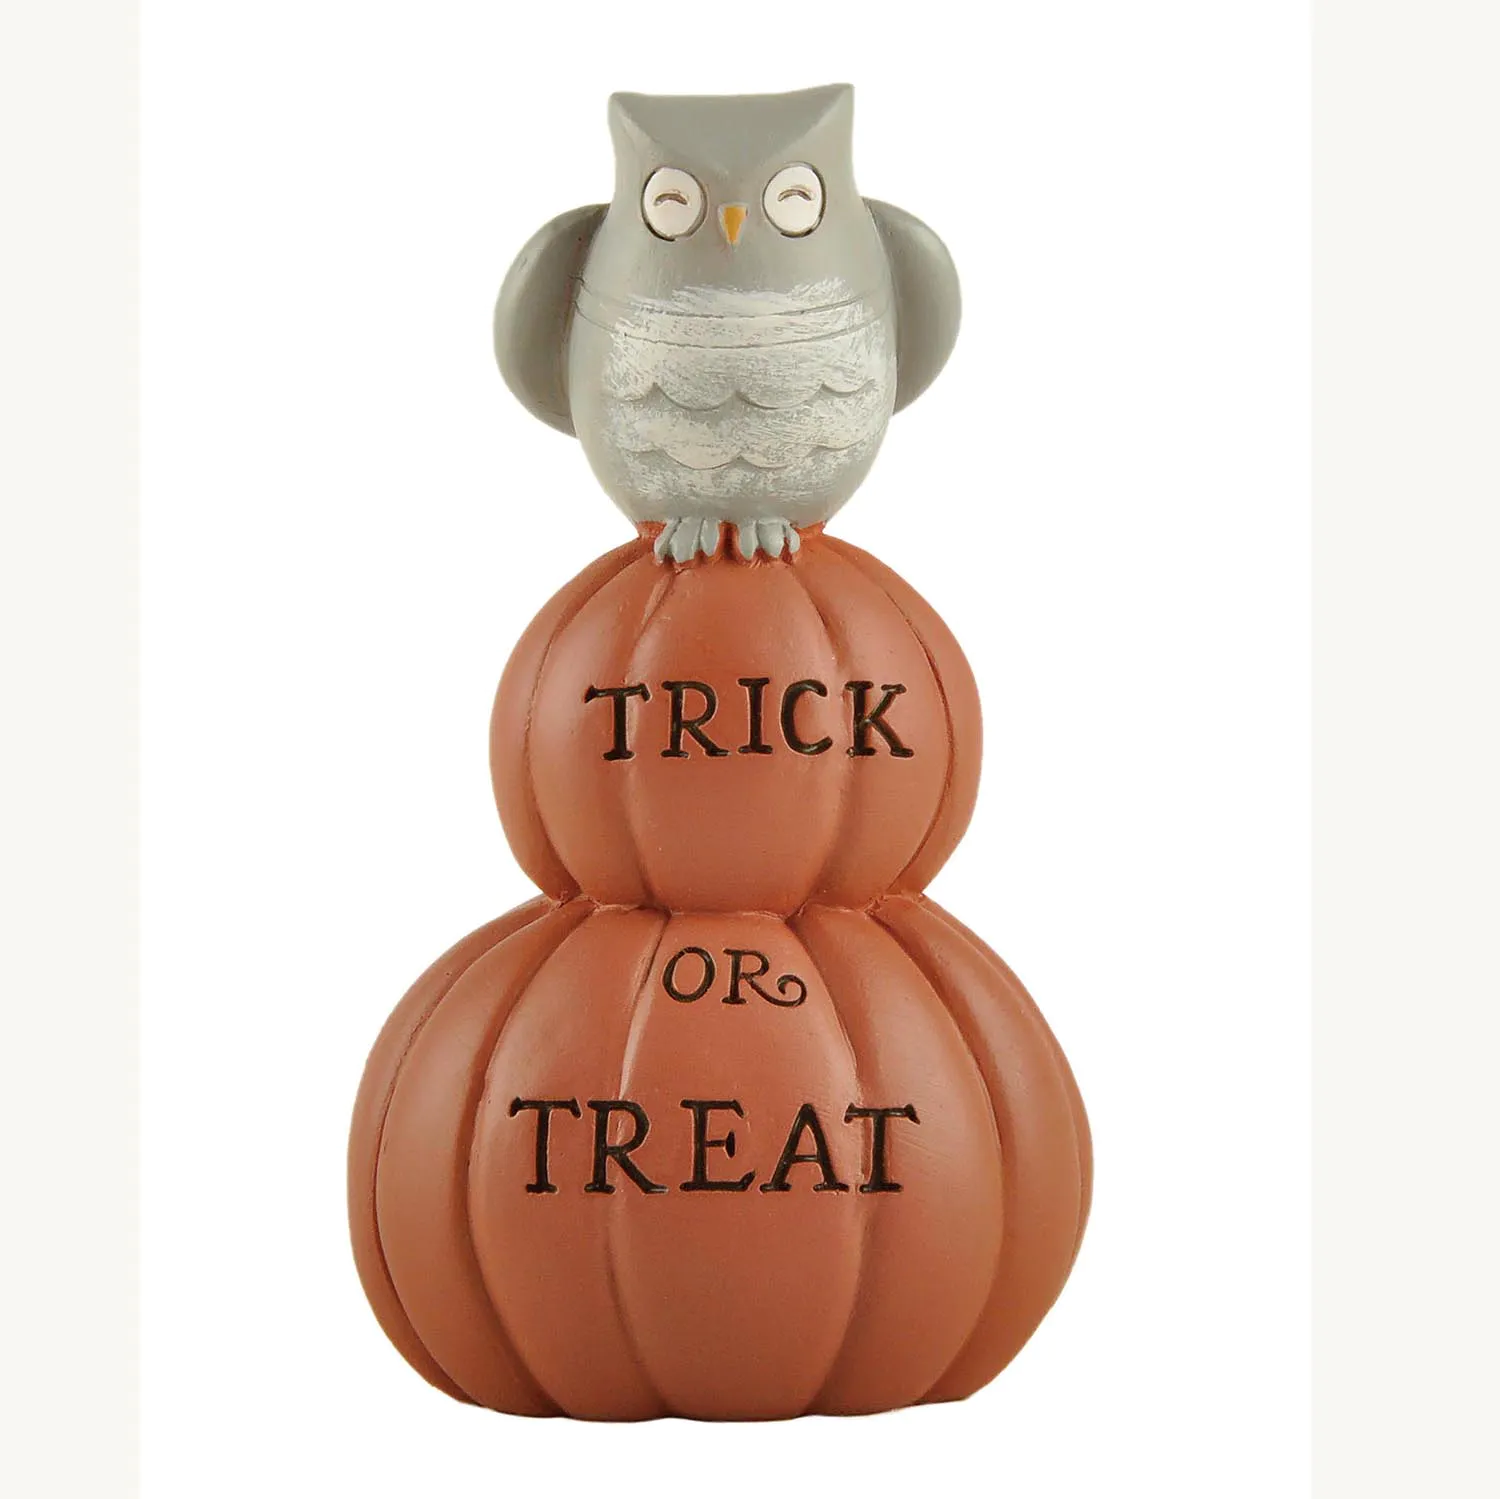 Whimsical Owl & Pumpkin Stack - The Perfect Halloween Resin Decor 'Trick or Treat236-13855